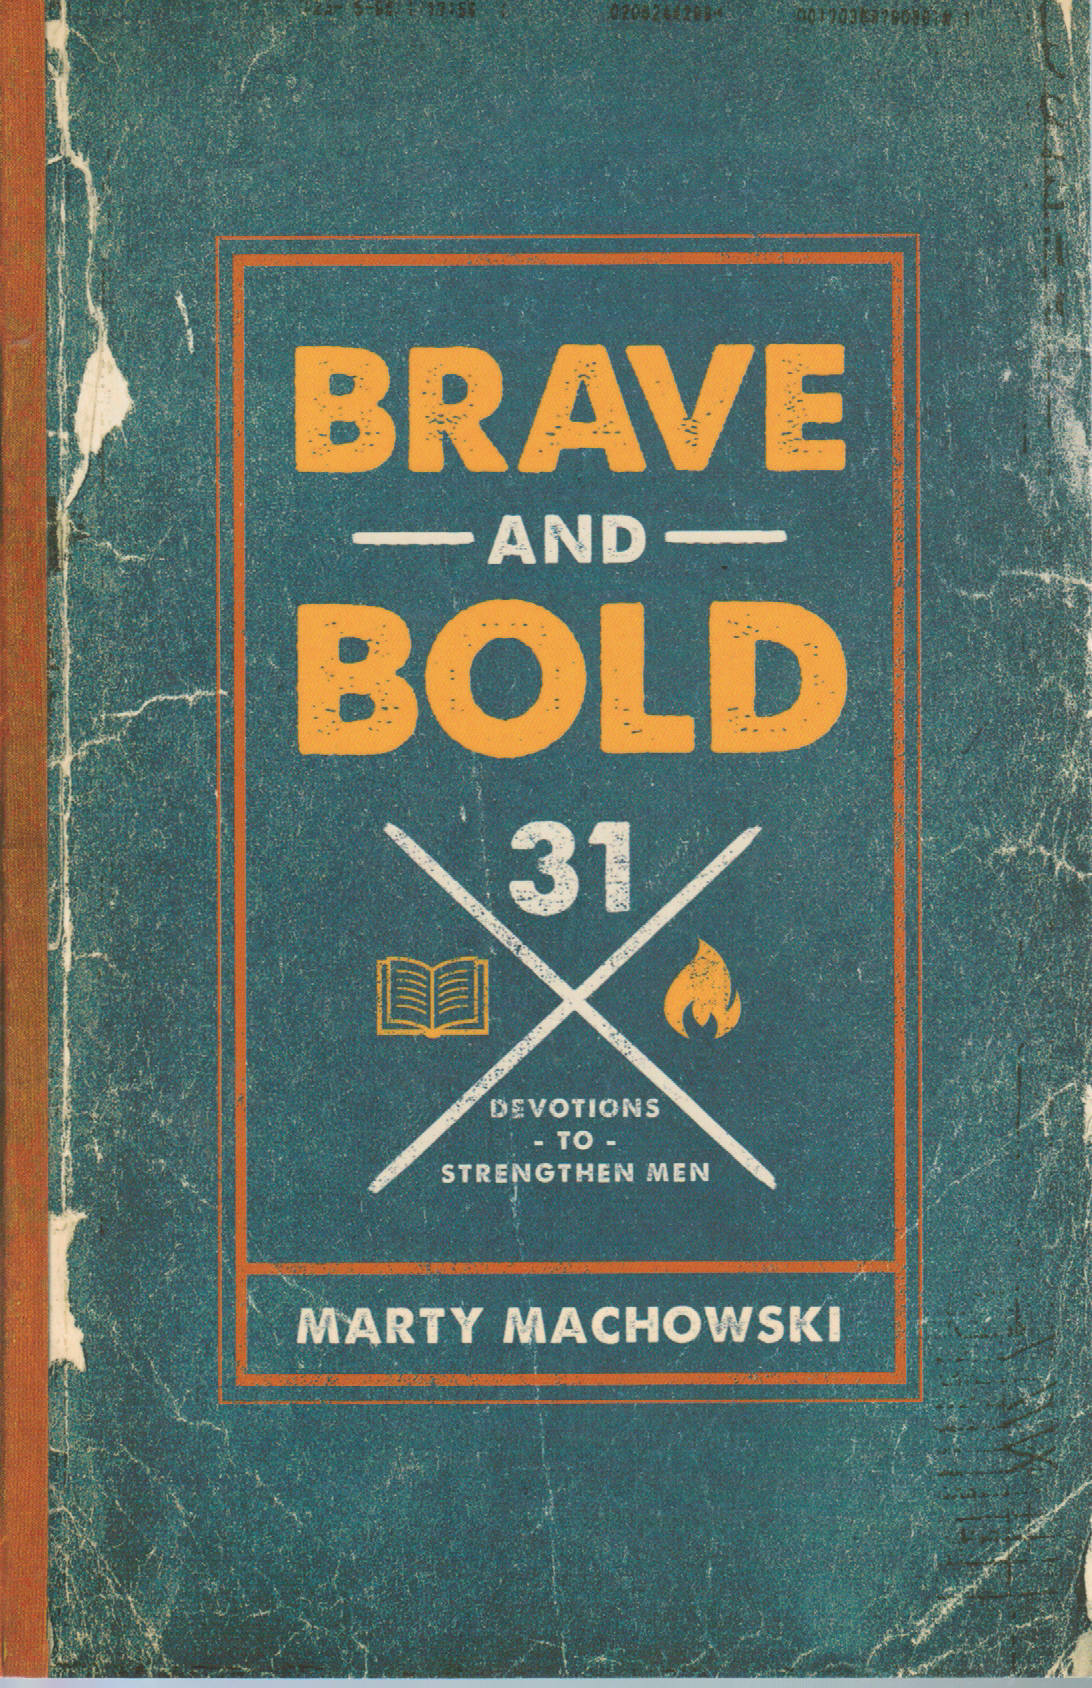 Brave and Bold: 31 Devotions to Strengthen Men